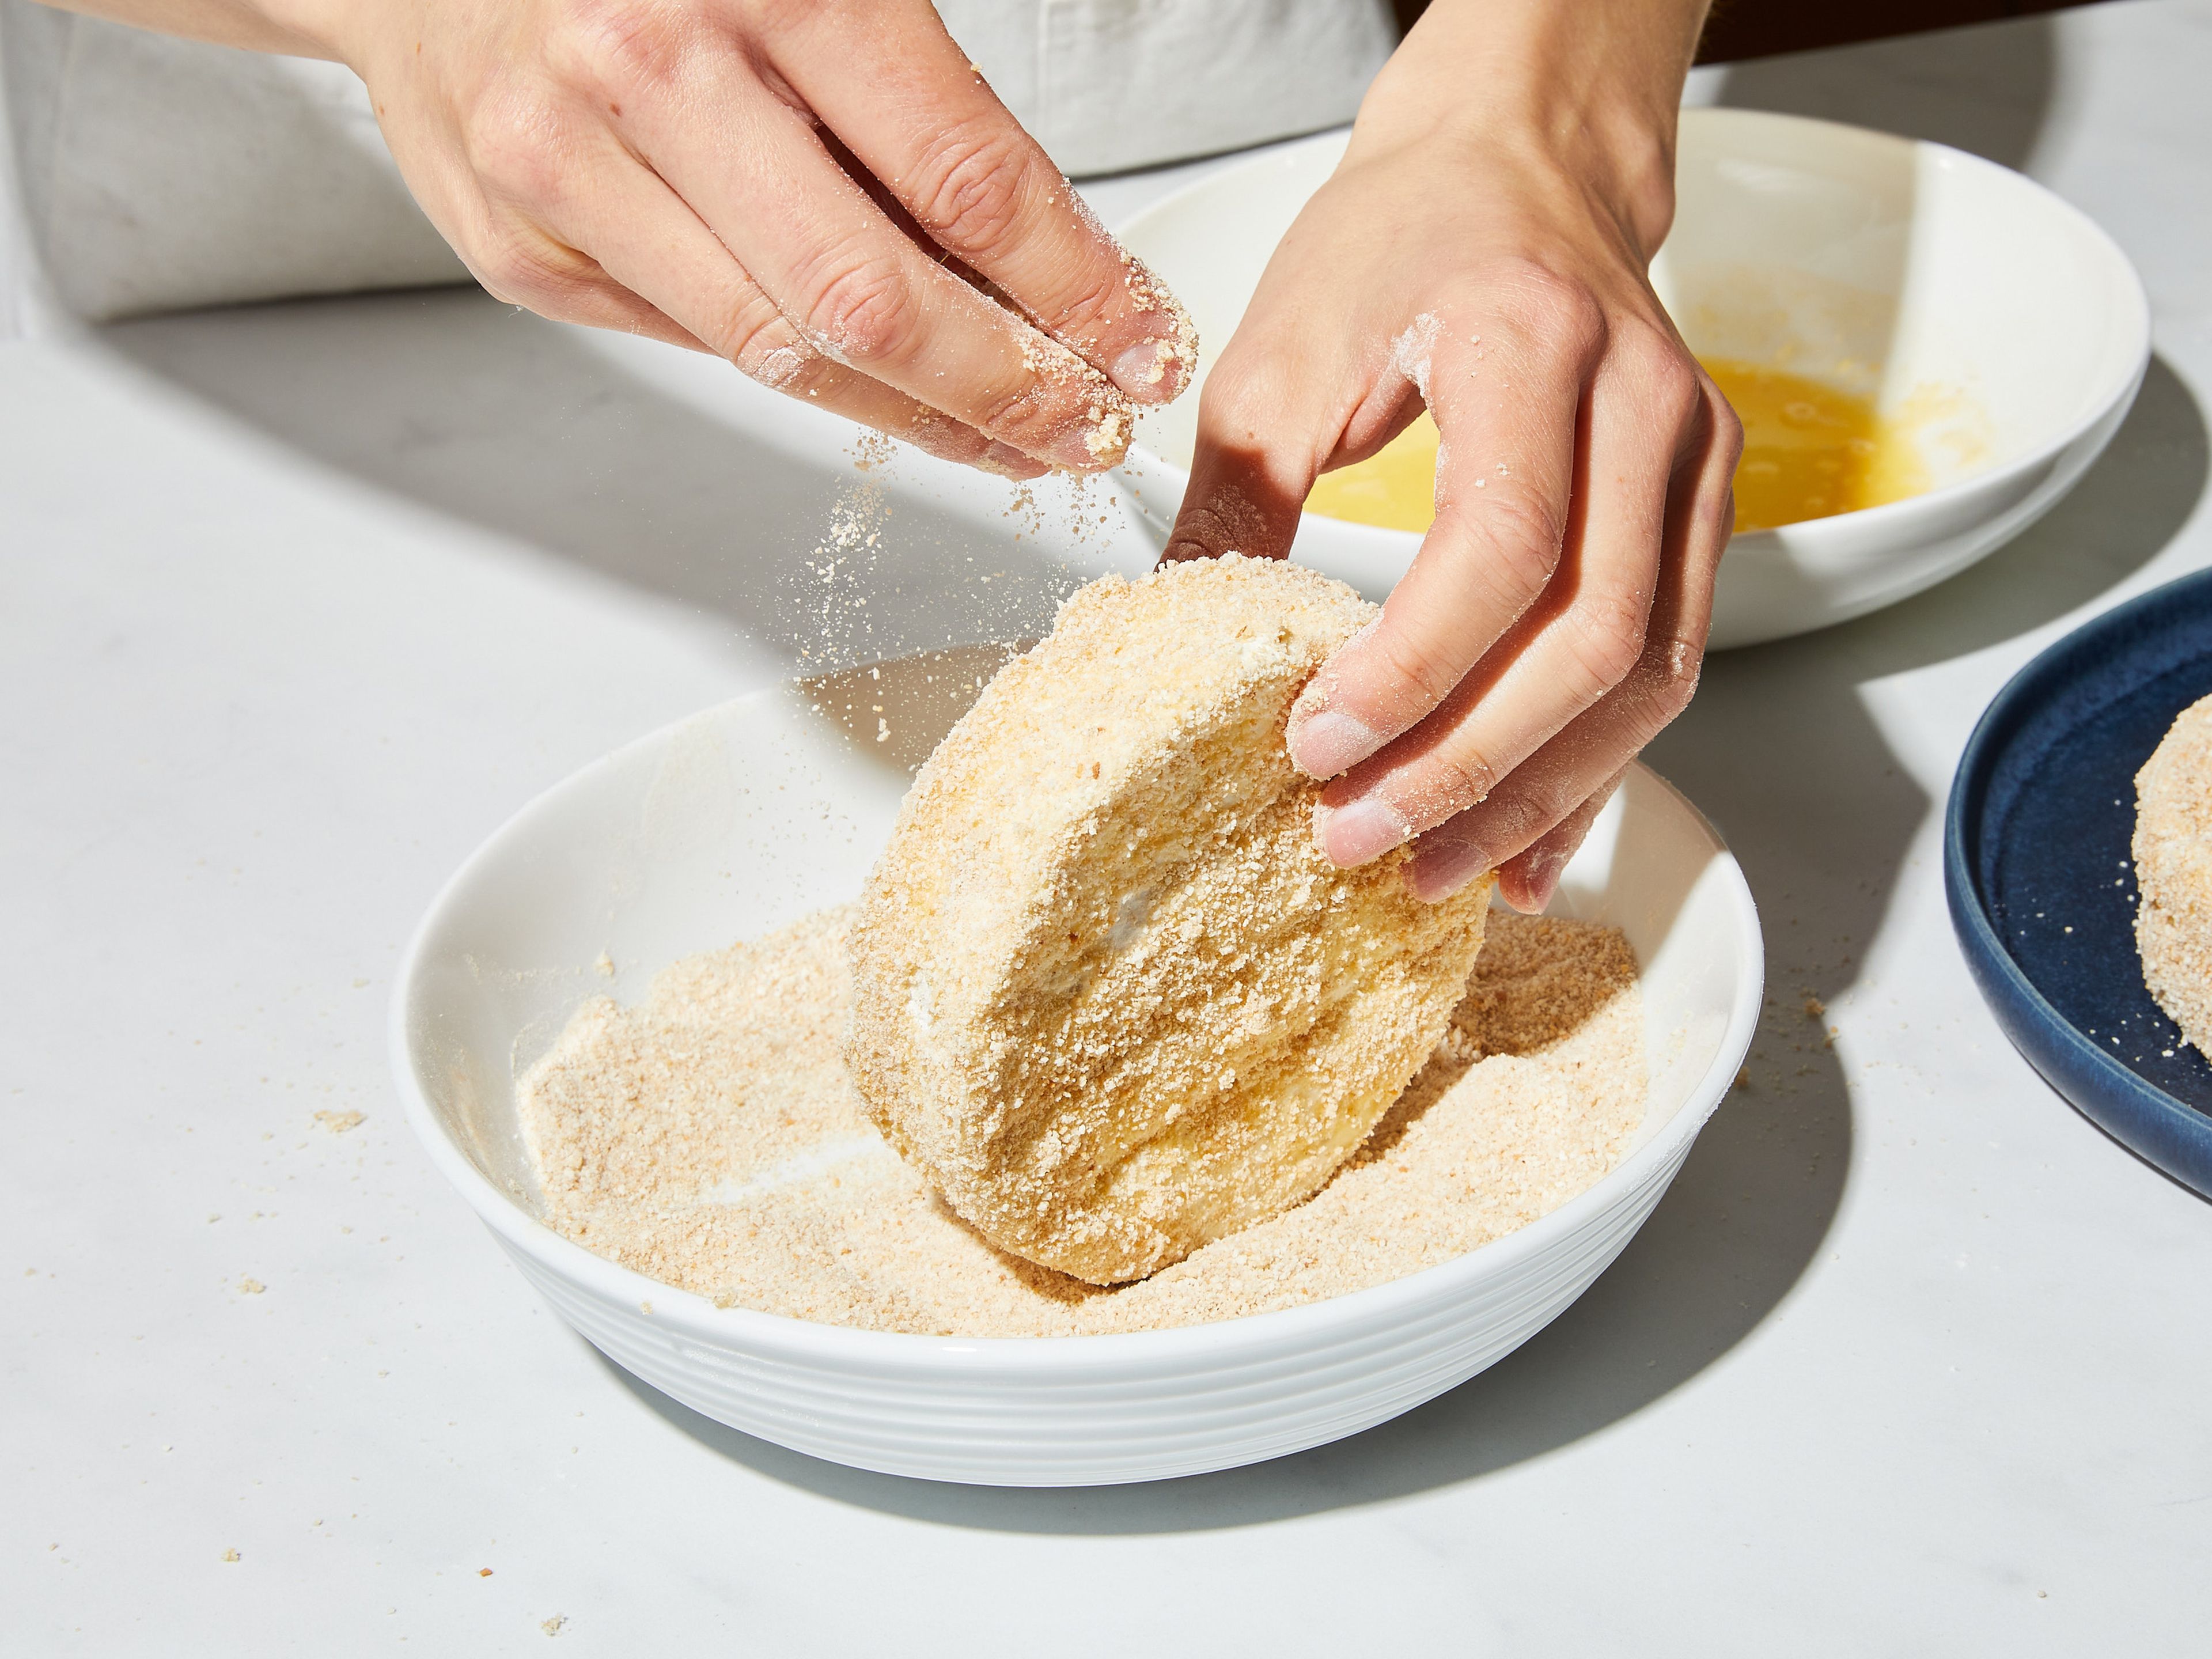 Preheat the oven to 100°C/200°F. Set up your breading station by adding flour, breadcrumbs, and egg to three separate, deep bowls. Beat the egg with a fork. Turn the cheese first in the flour, then in the egg, and lastly in breadcrumbs. Repeat the whole process with remaining cheese.